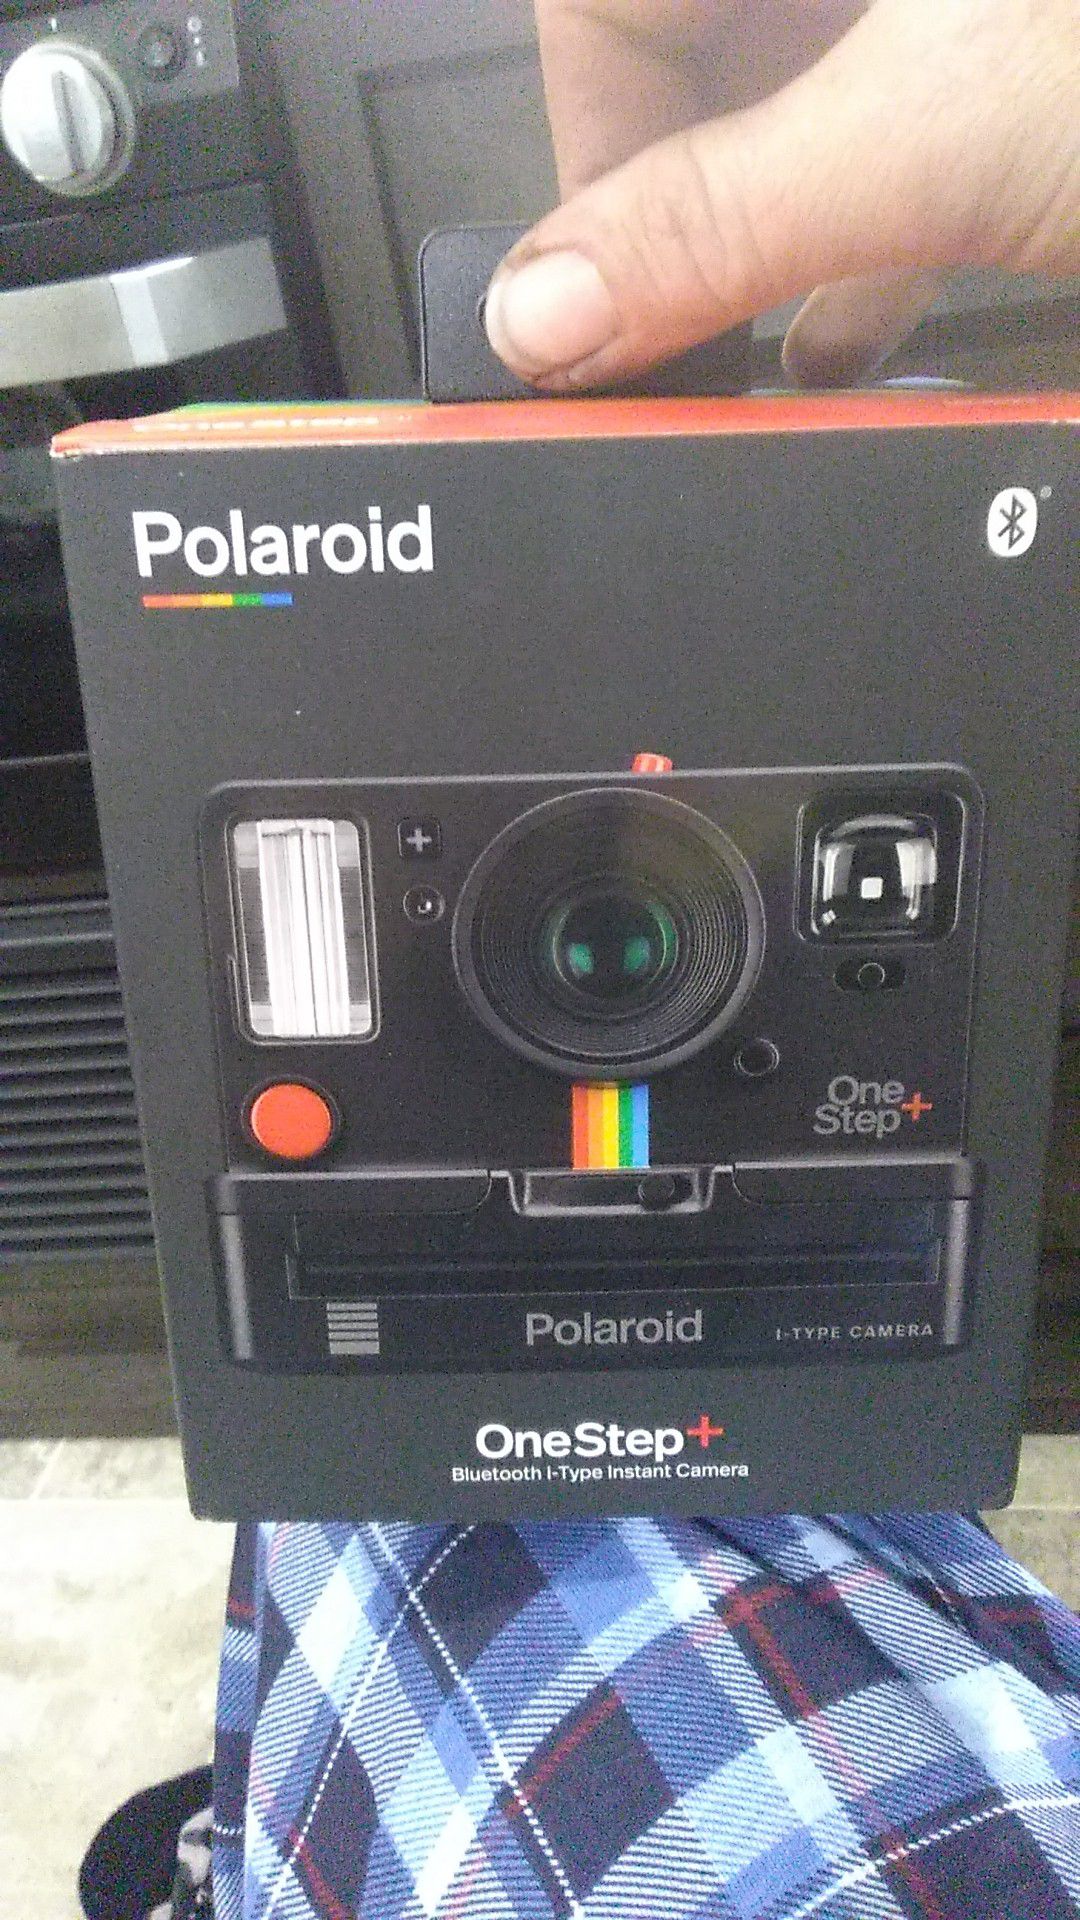 Polaroid One-Step Bluetooth i-Type Instant Camera with 2-8 packs of i-Type colored photos and 1-8pack of i-Type B&W photos